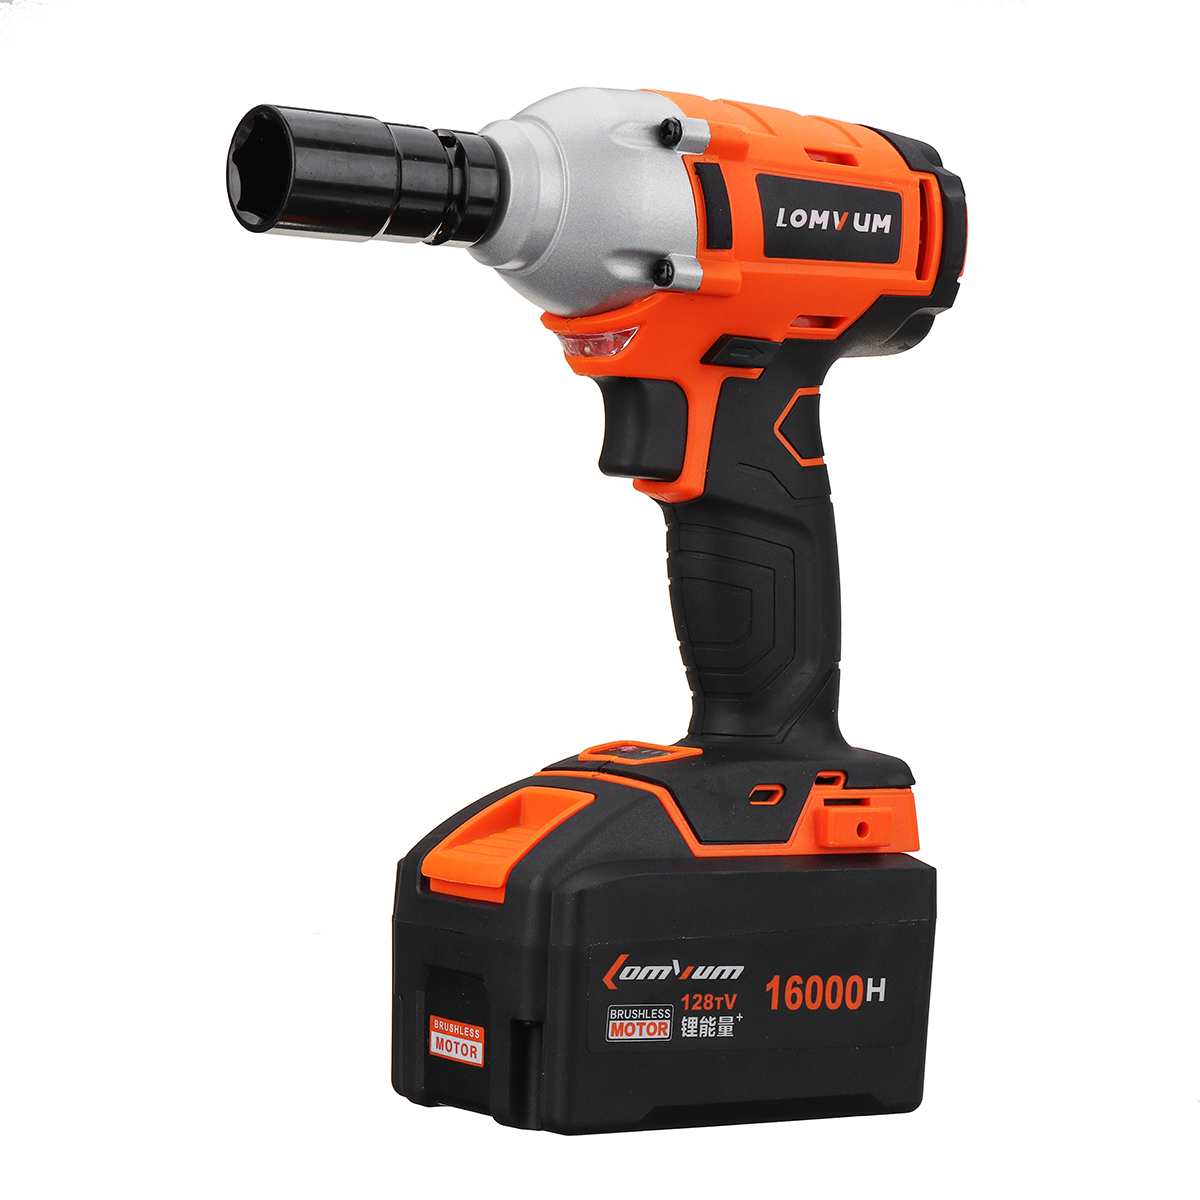 

Lomvum 16000mA 320Nm High Torque Lithium-ion Impact Wrench Cordless Power Electric Wrench Drill